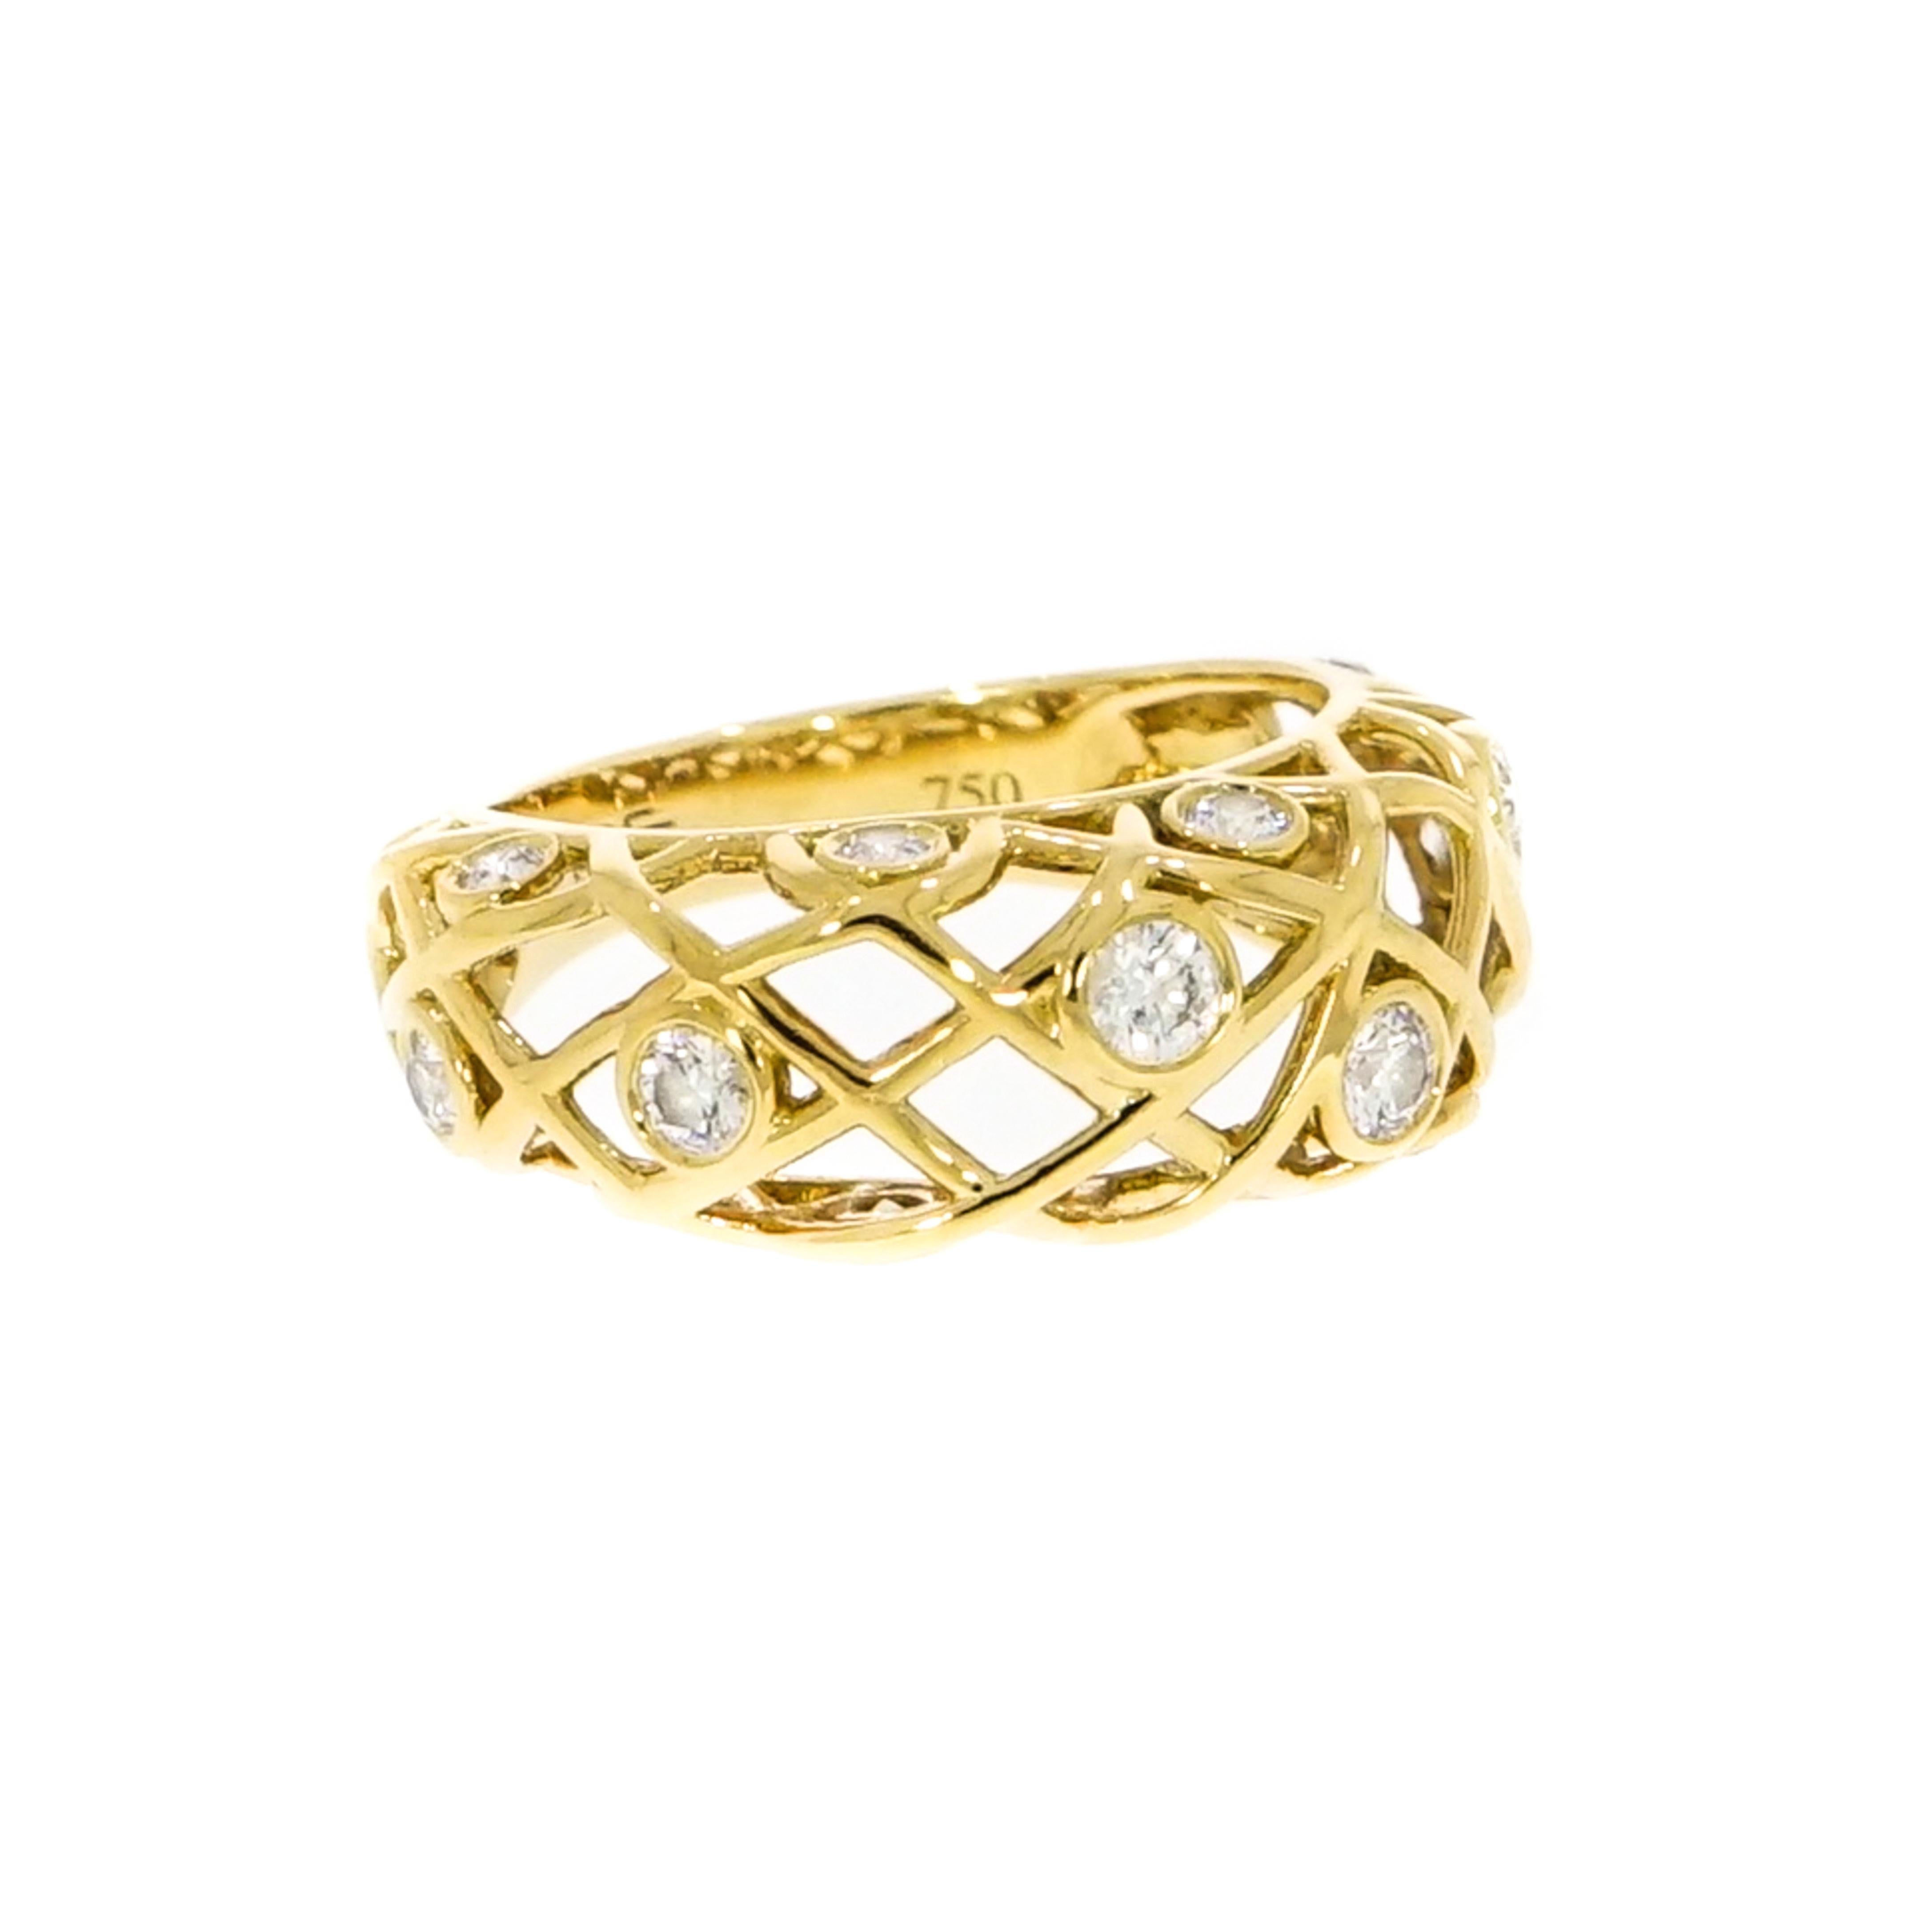 Hearts On Fire Diamond band, this is a beautiful ring crafted in 18k yellow gold and designed with bezel set diamonds. A ring of exceptional beauty that will make any woman stand out, the Brocade Diamond Right Hand Ring effortlessly captures the